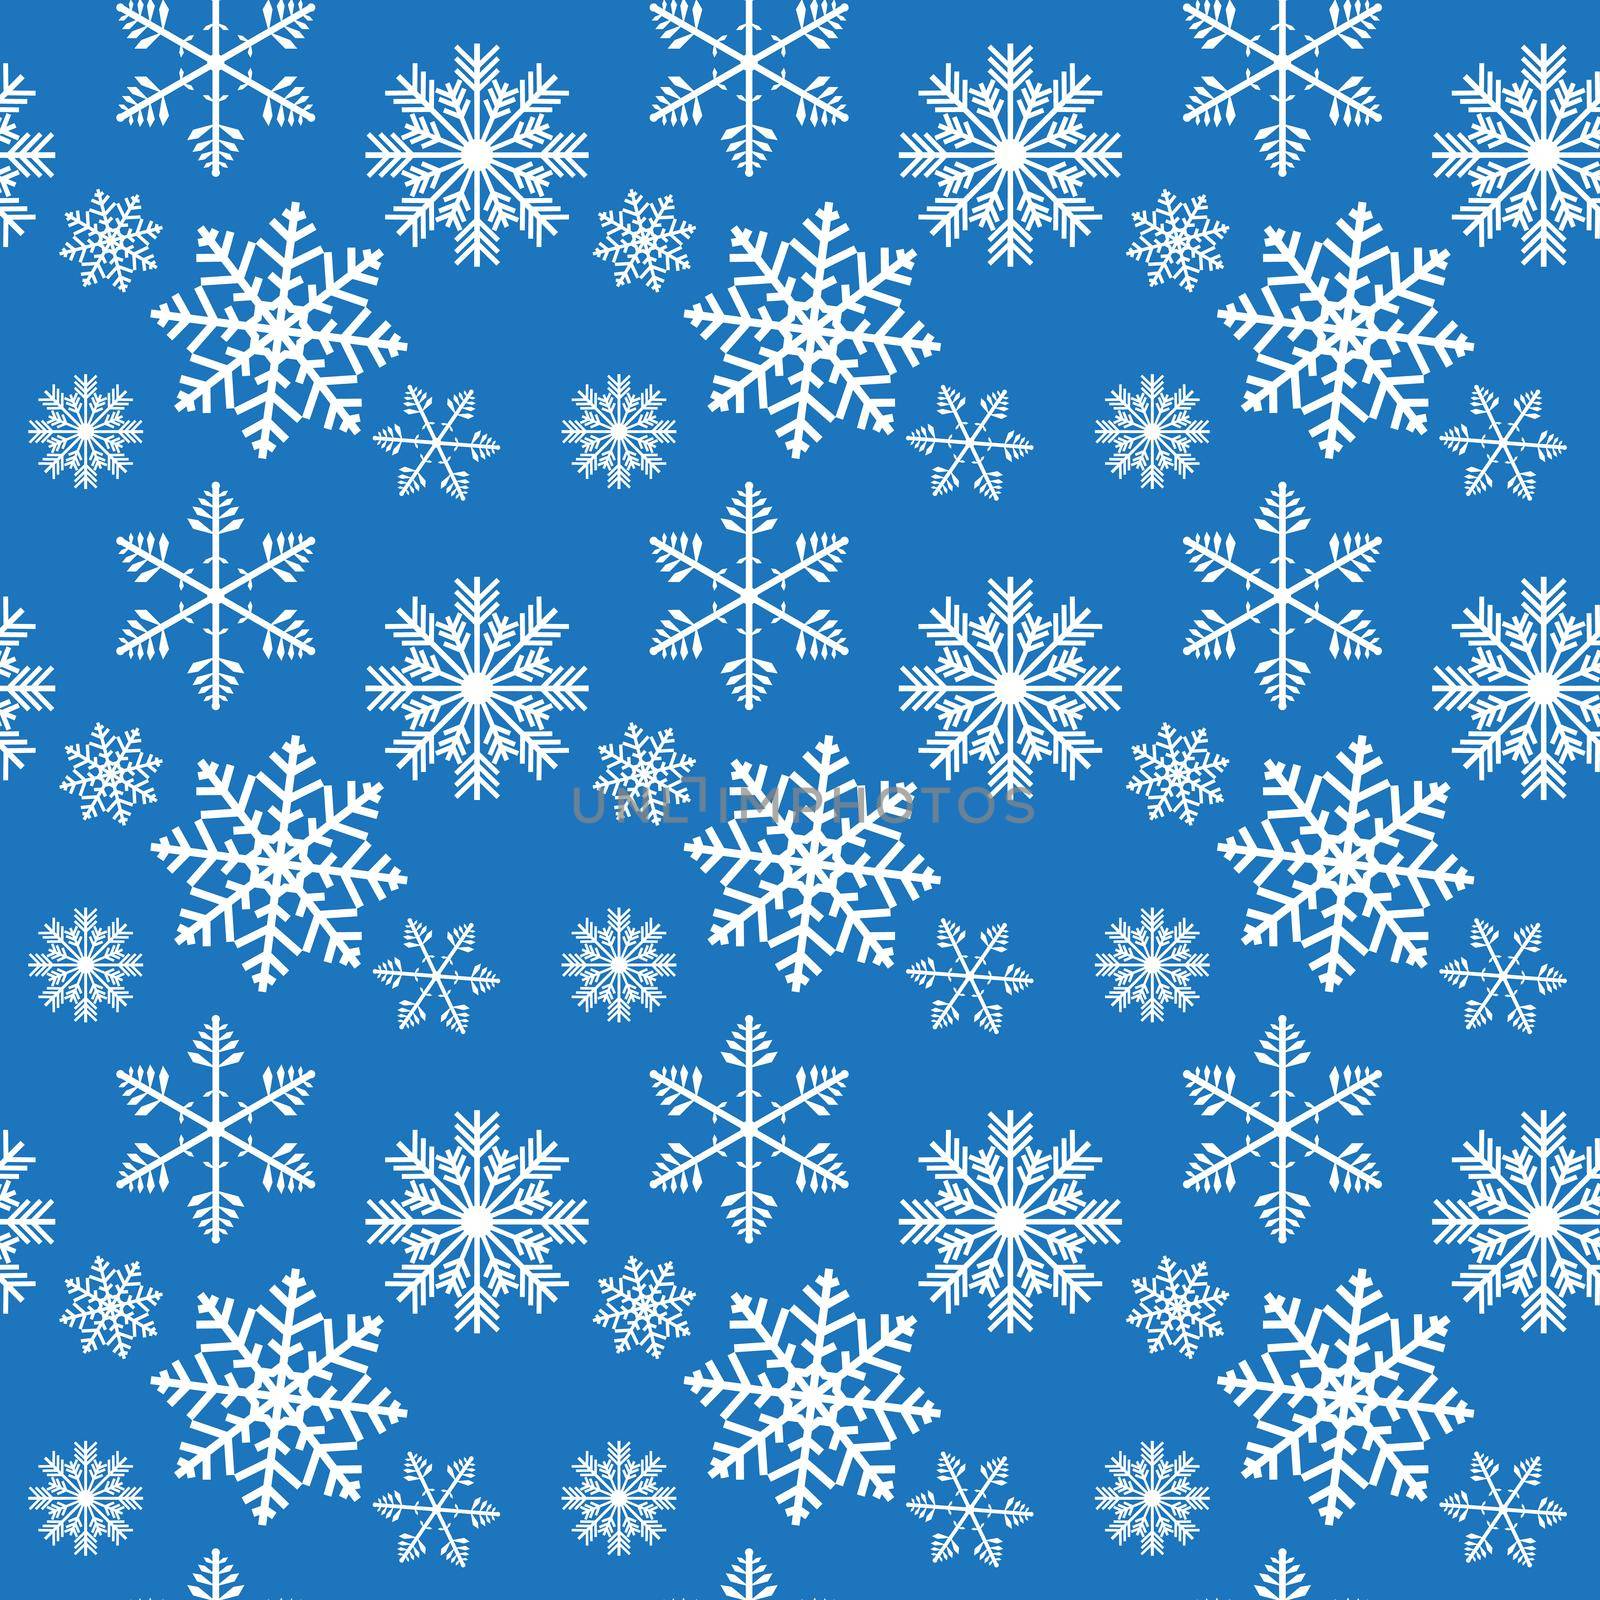 Abstract Beauty Christmas and New Year Background with Snow and Snowflakes. Vector Illustration. EPS10